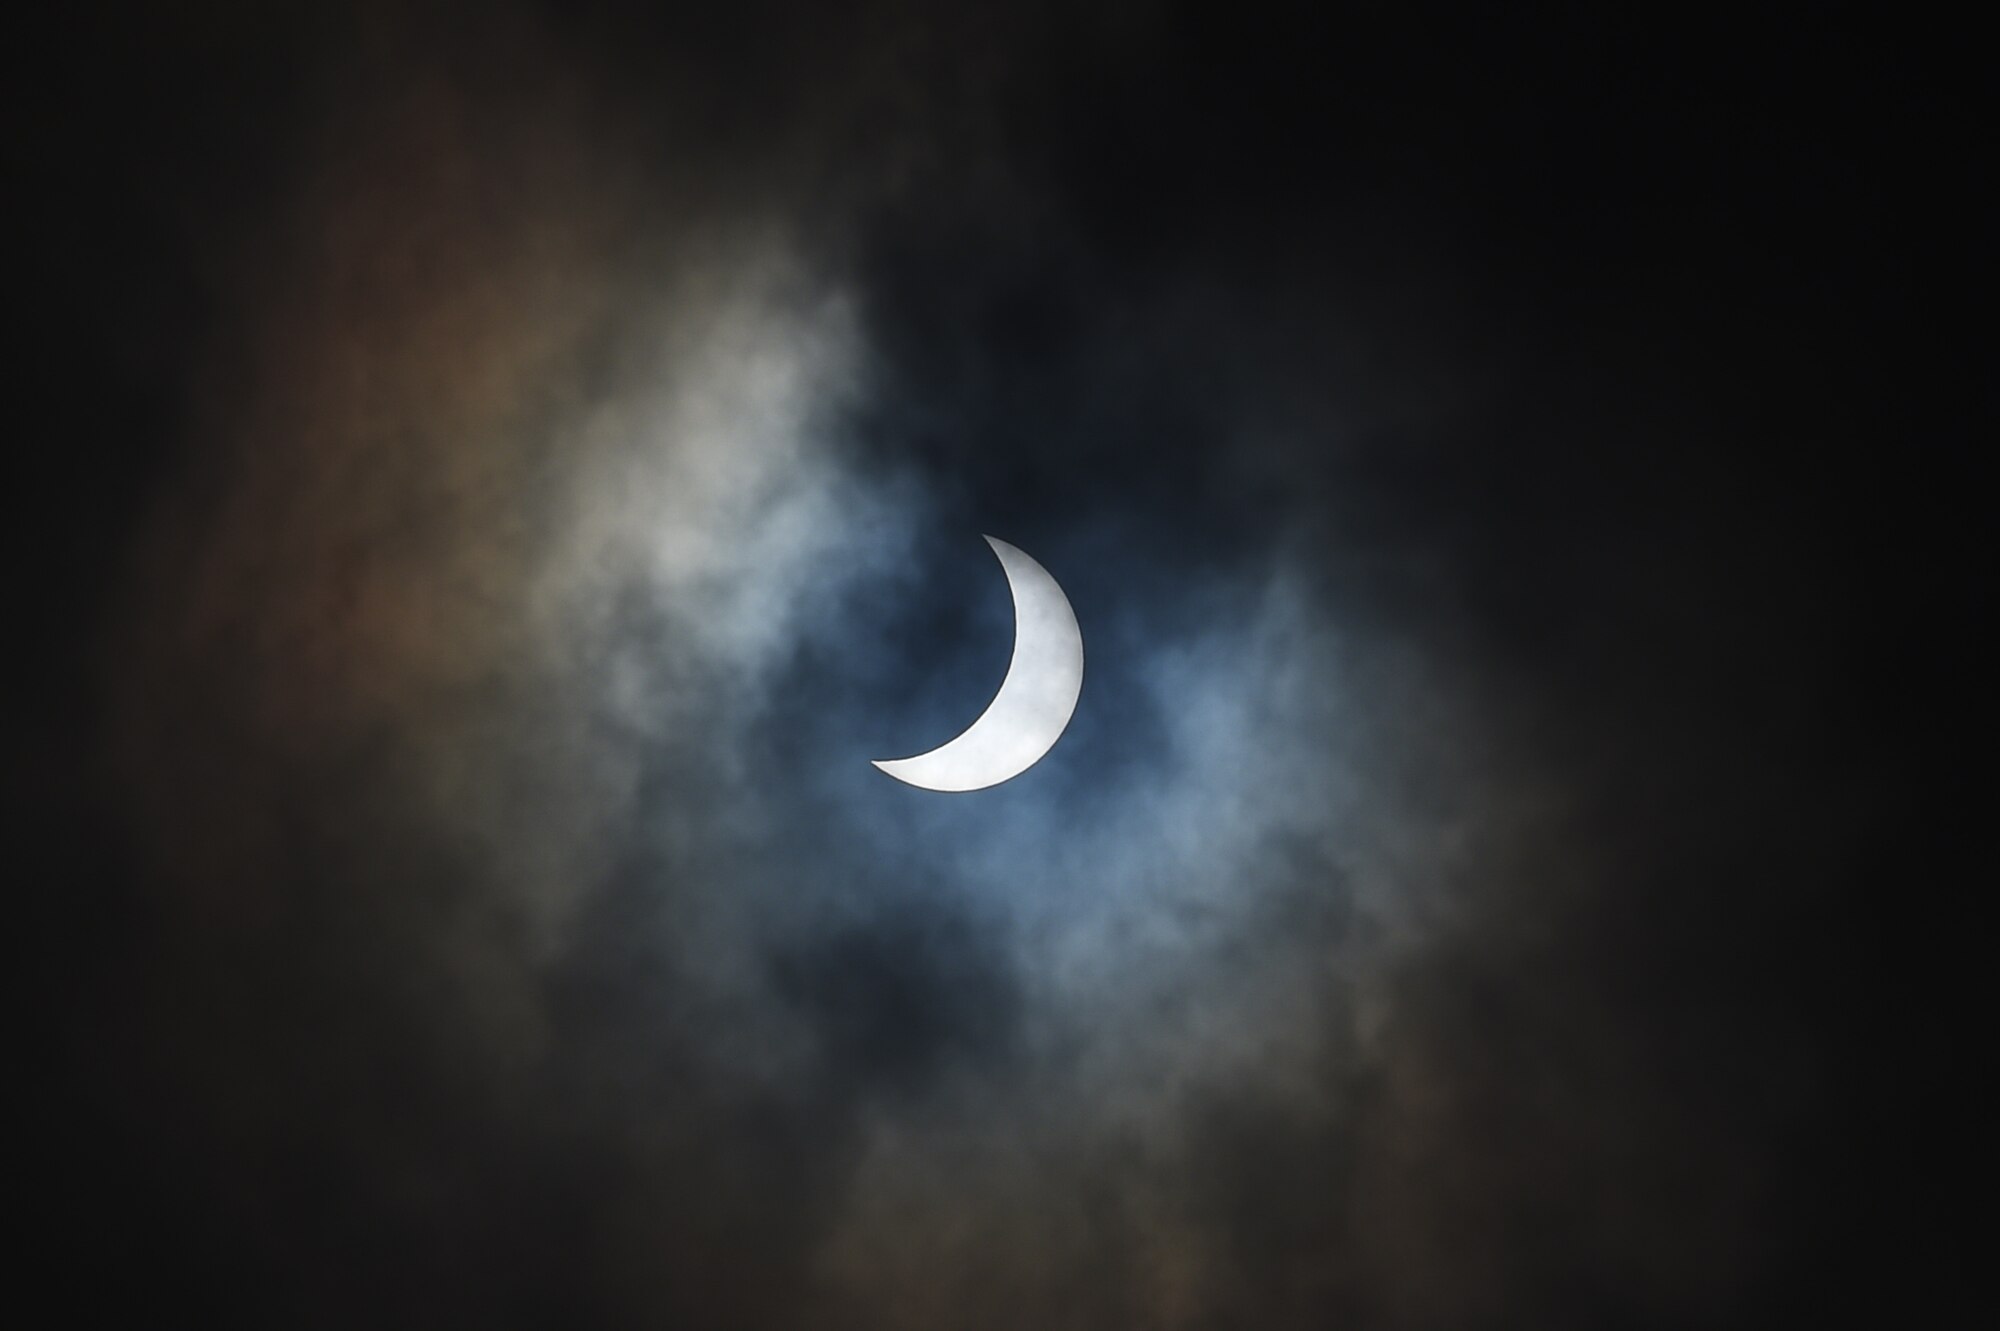 The moon moves past its position between the sun and the Earth at 9:54 a.m. during a solar eclipse, visible from RAF Alconbury, England, March 20, 2015. The United Kingdom will not see a solar eclipse of this scale again until 2026. (U.S. Air Force photo by Staff Sgt. Jarad A. Denton/Released)